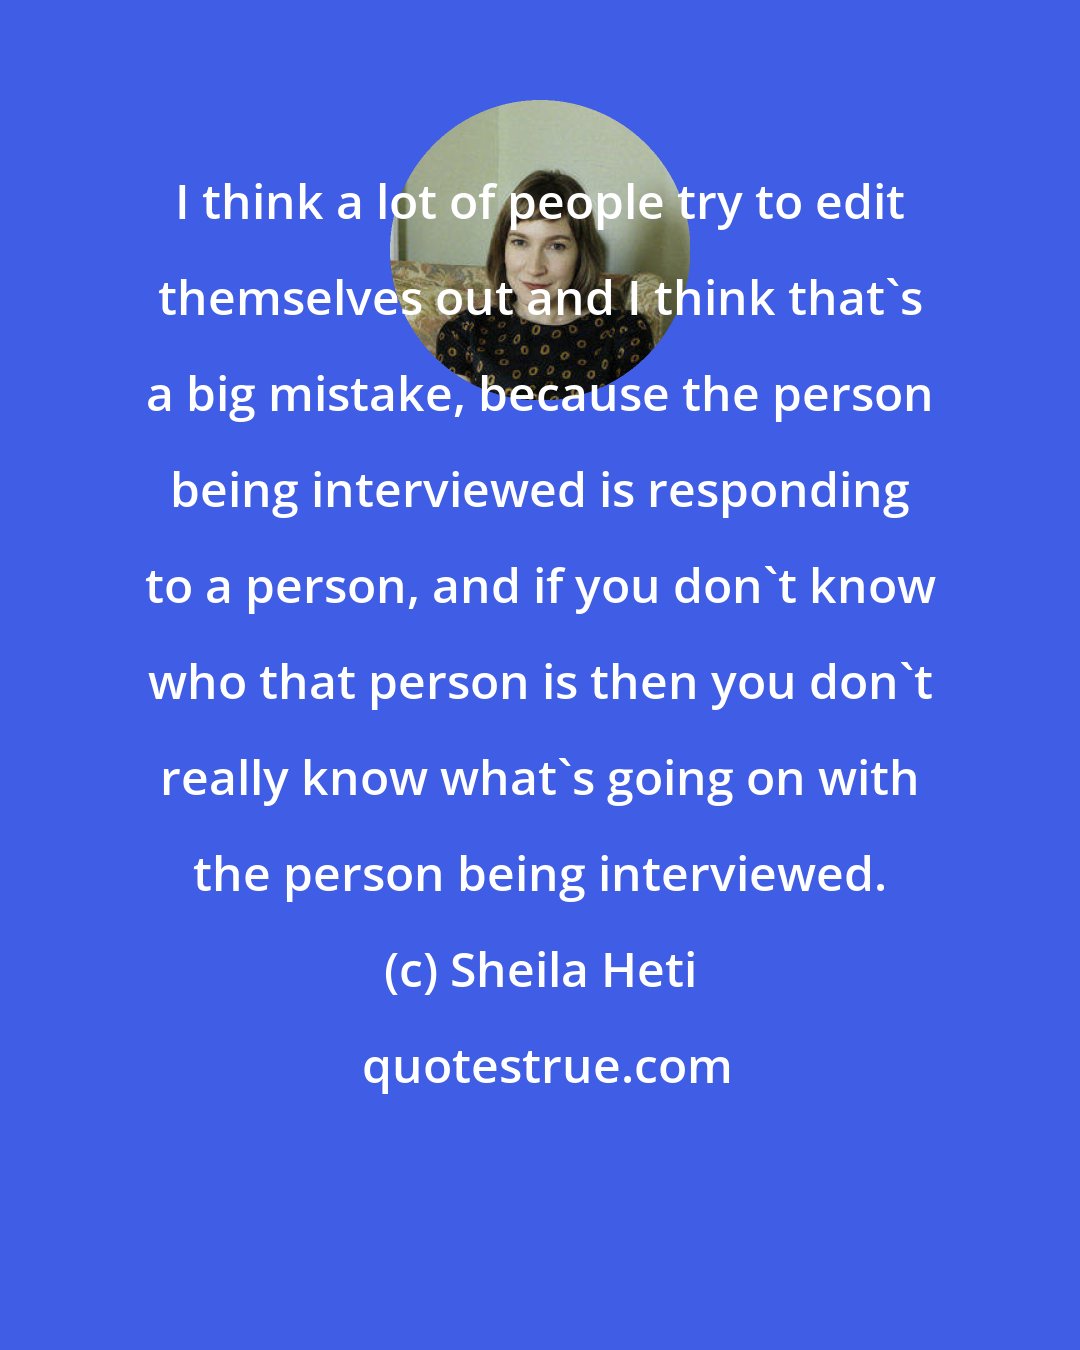 Sheila Heti: I think a lot of people try to edit themselves out and I think that's a big mistake, because the person being interviewed is responding to a person, and if you don't know who that person is then you don't really know what's going on with the person being interviewed.